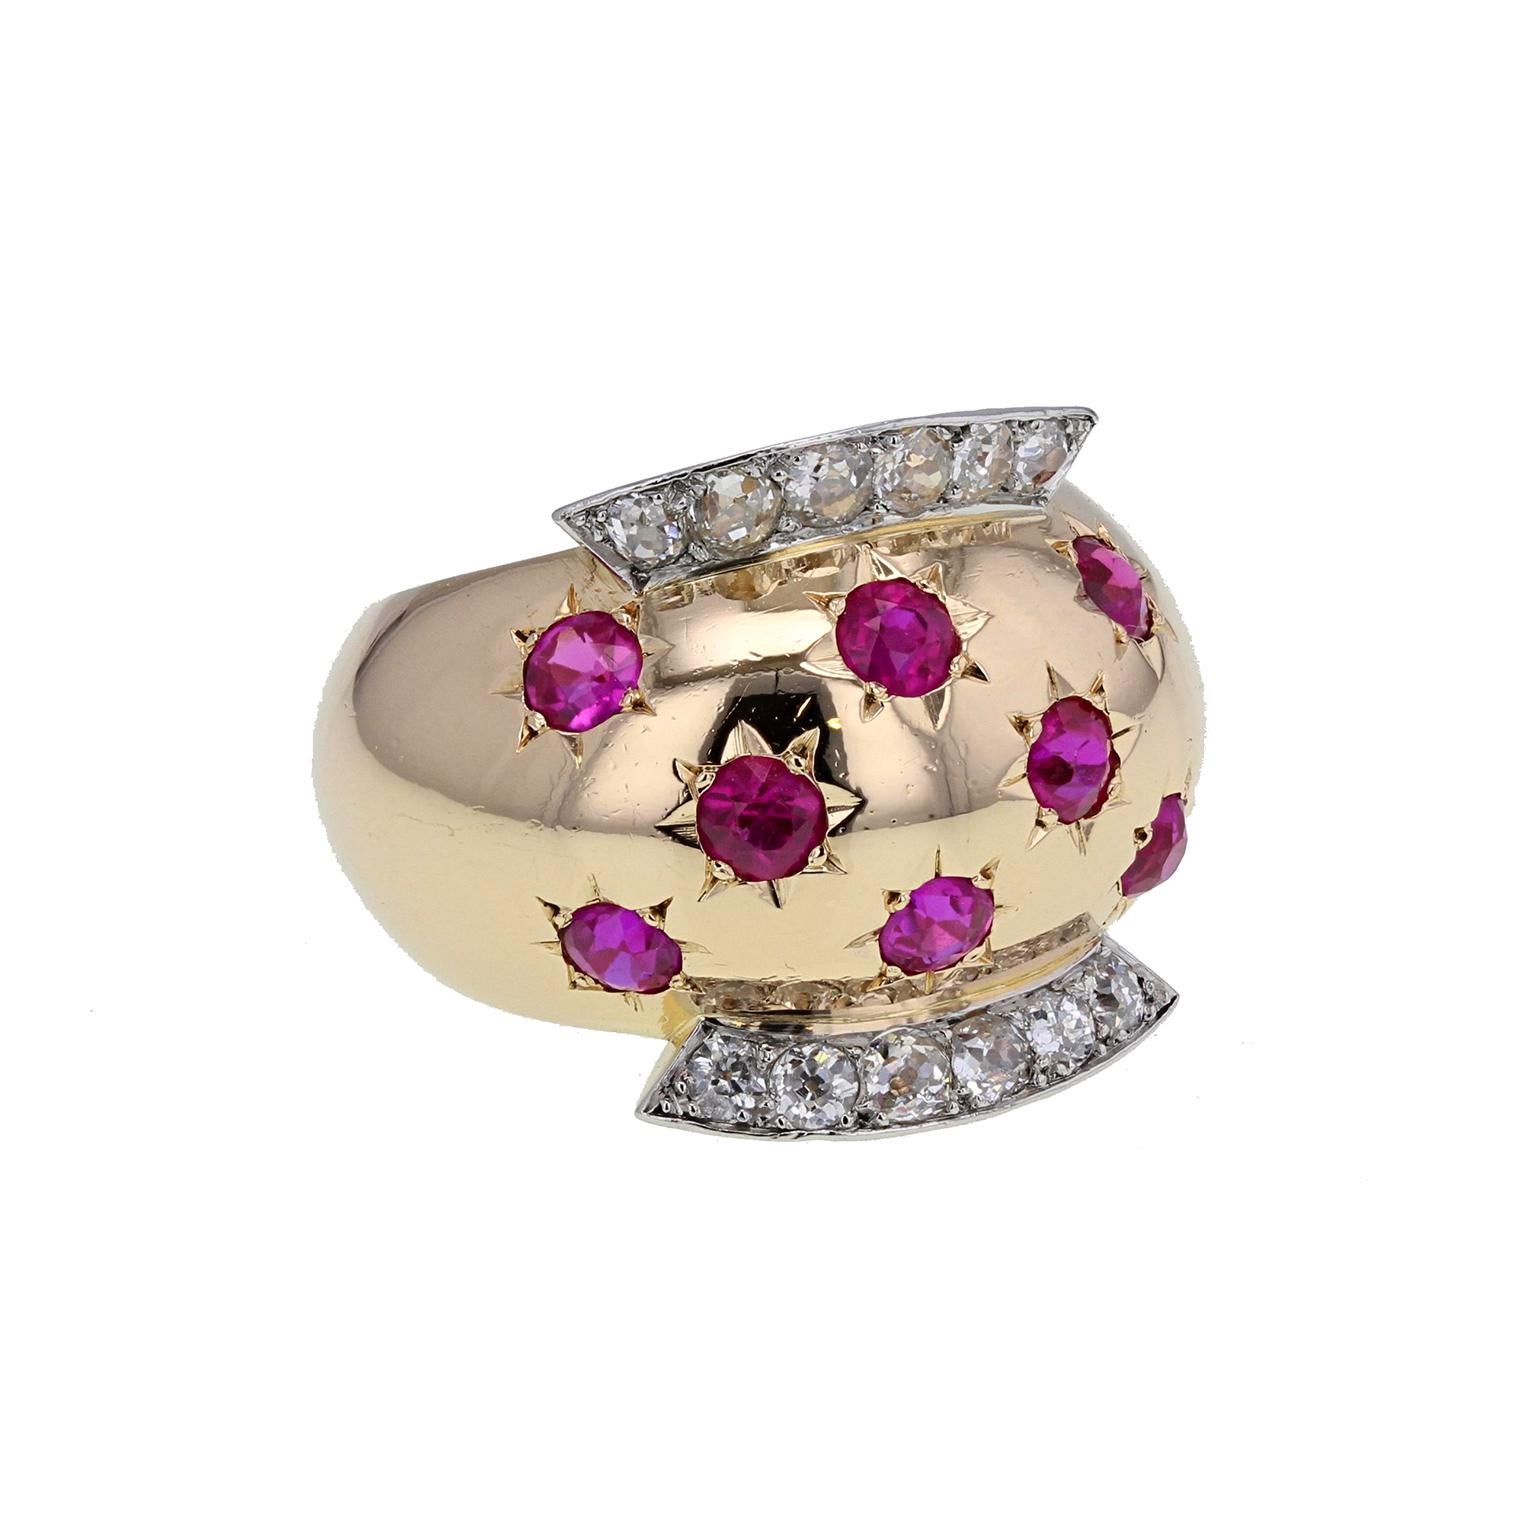 Van Cleef & Arpels 1940s Retro Ruby Diamond Gold Ring In Excellent Condition For Sale In Newcastle Upon Tyne, GB